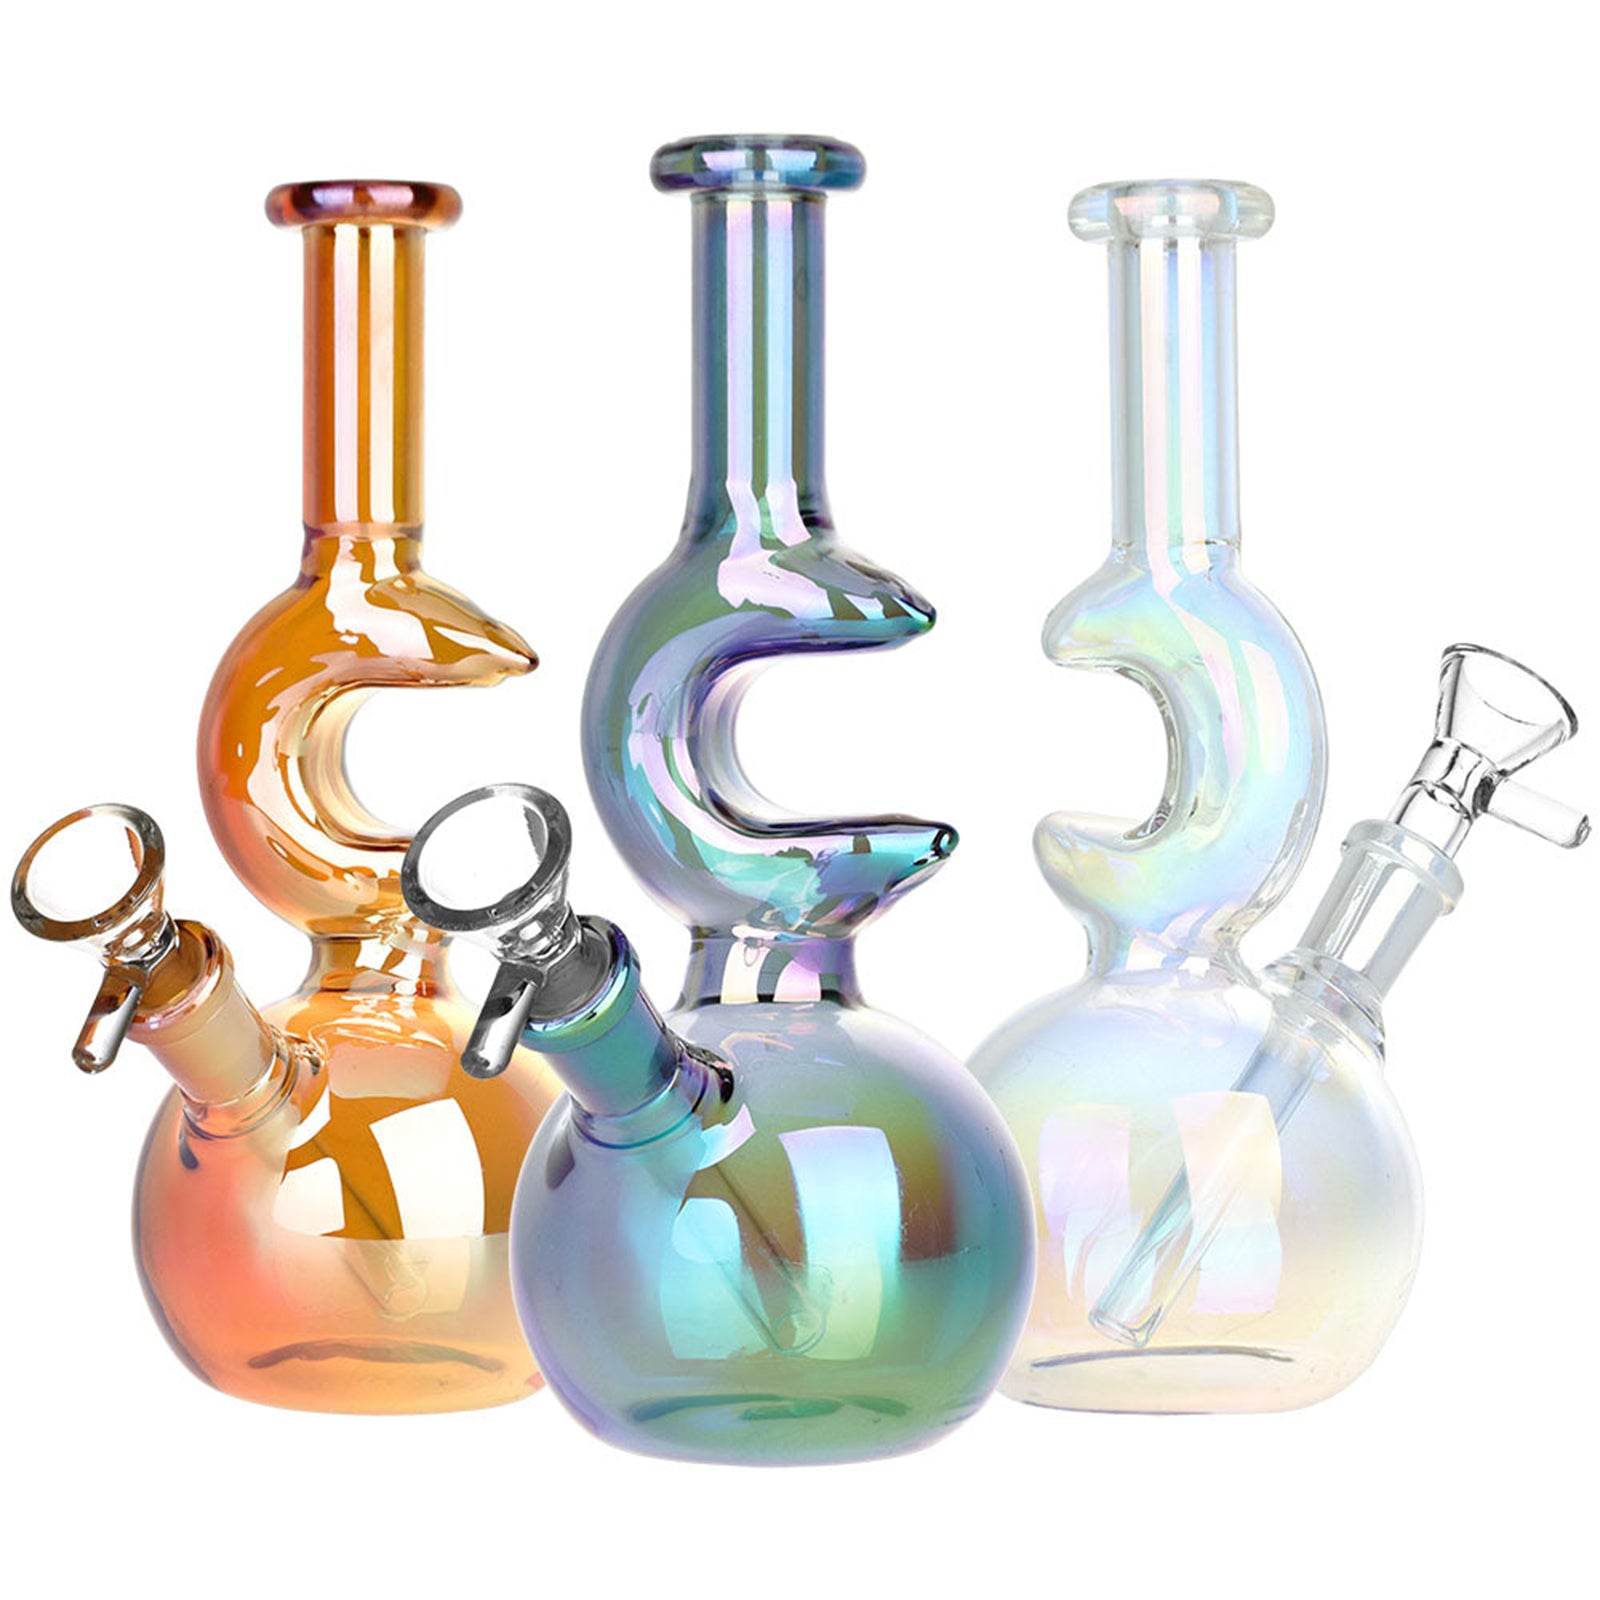 Lunar Glow Electroplated Bubble Bong - INHALCO